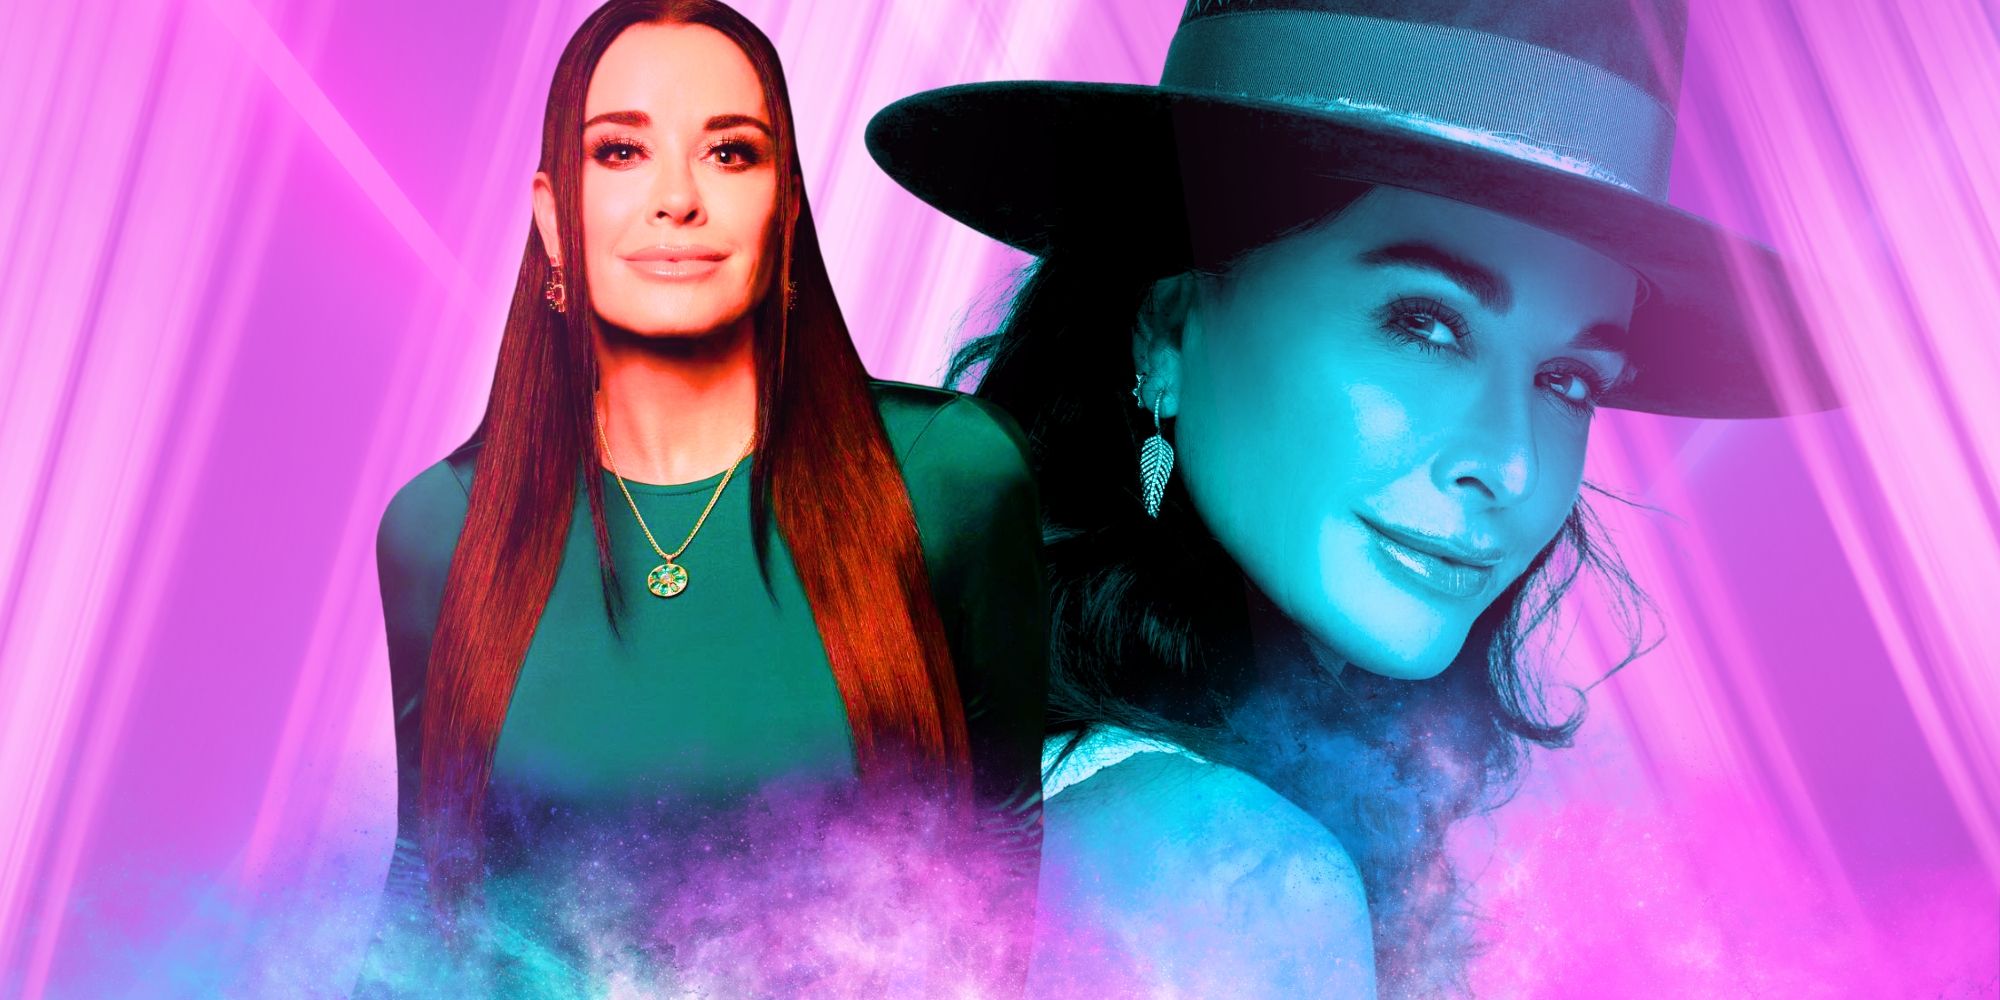 Kyle Richards montage from RHOBH